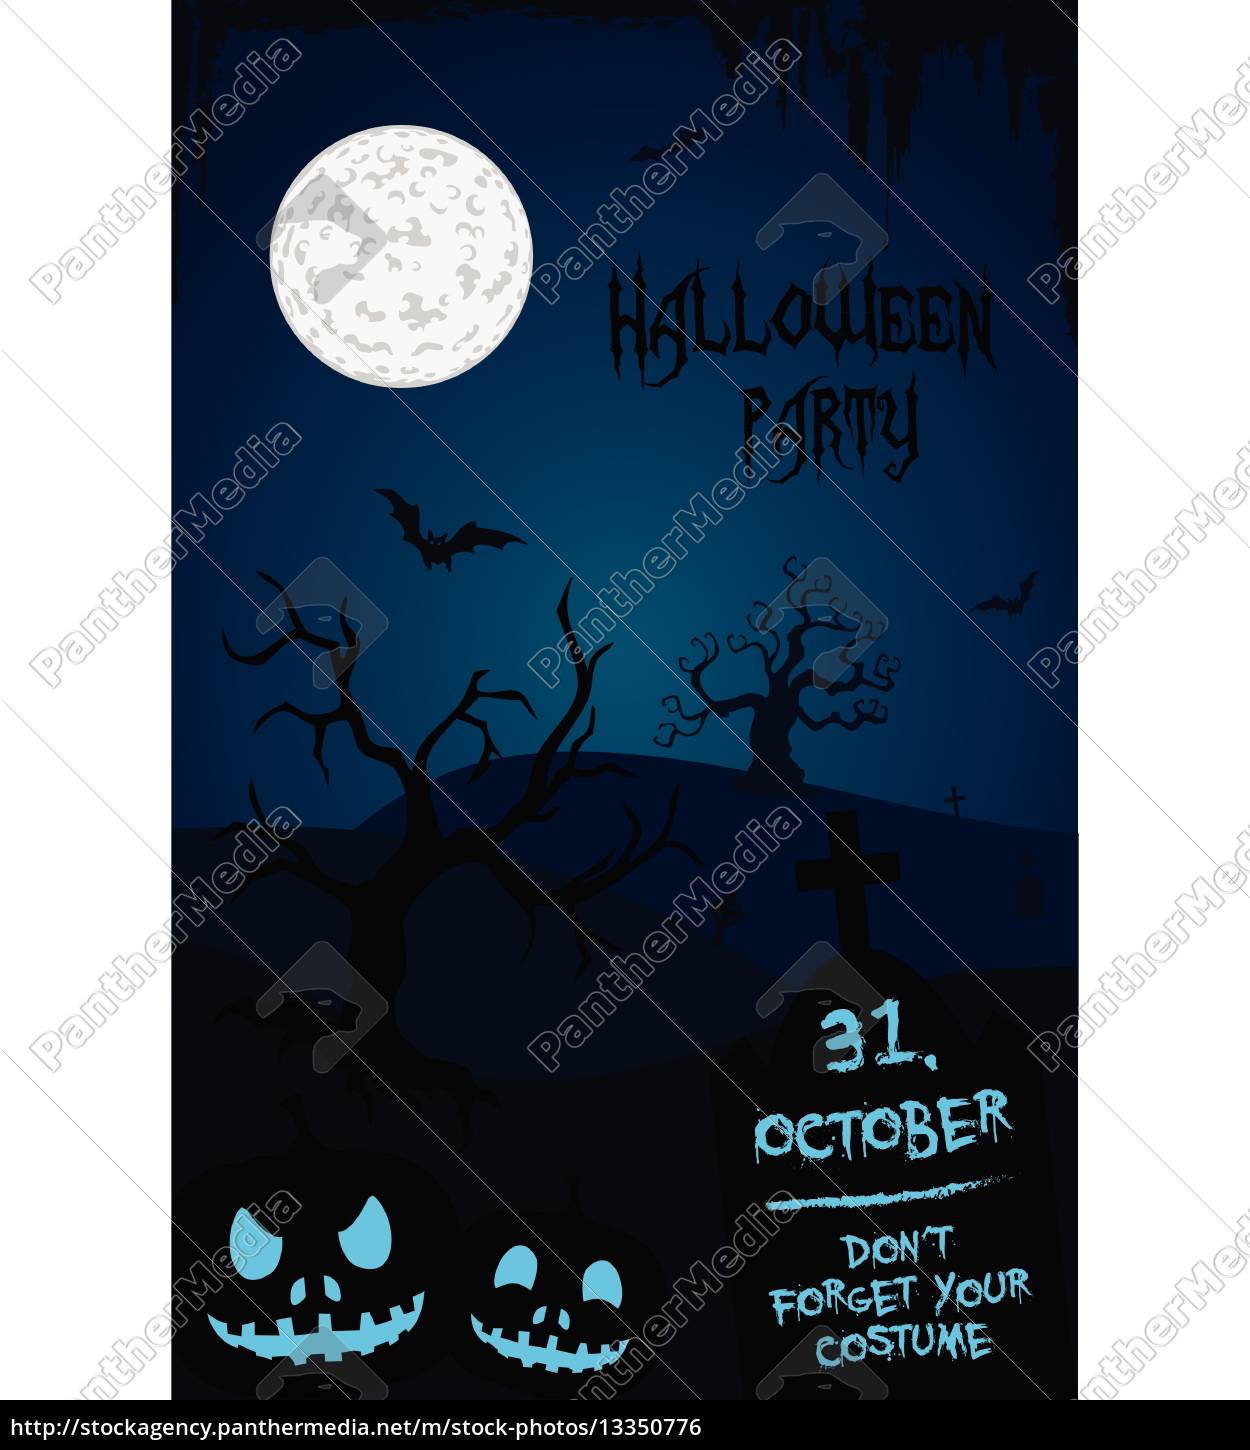 Halloween Party Flyer Template Blue And Black Royalty Free Photo Panthermedia Stock Agency